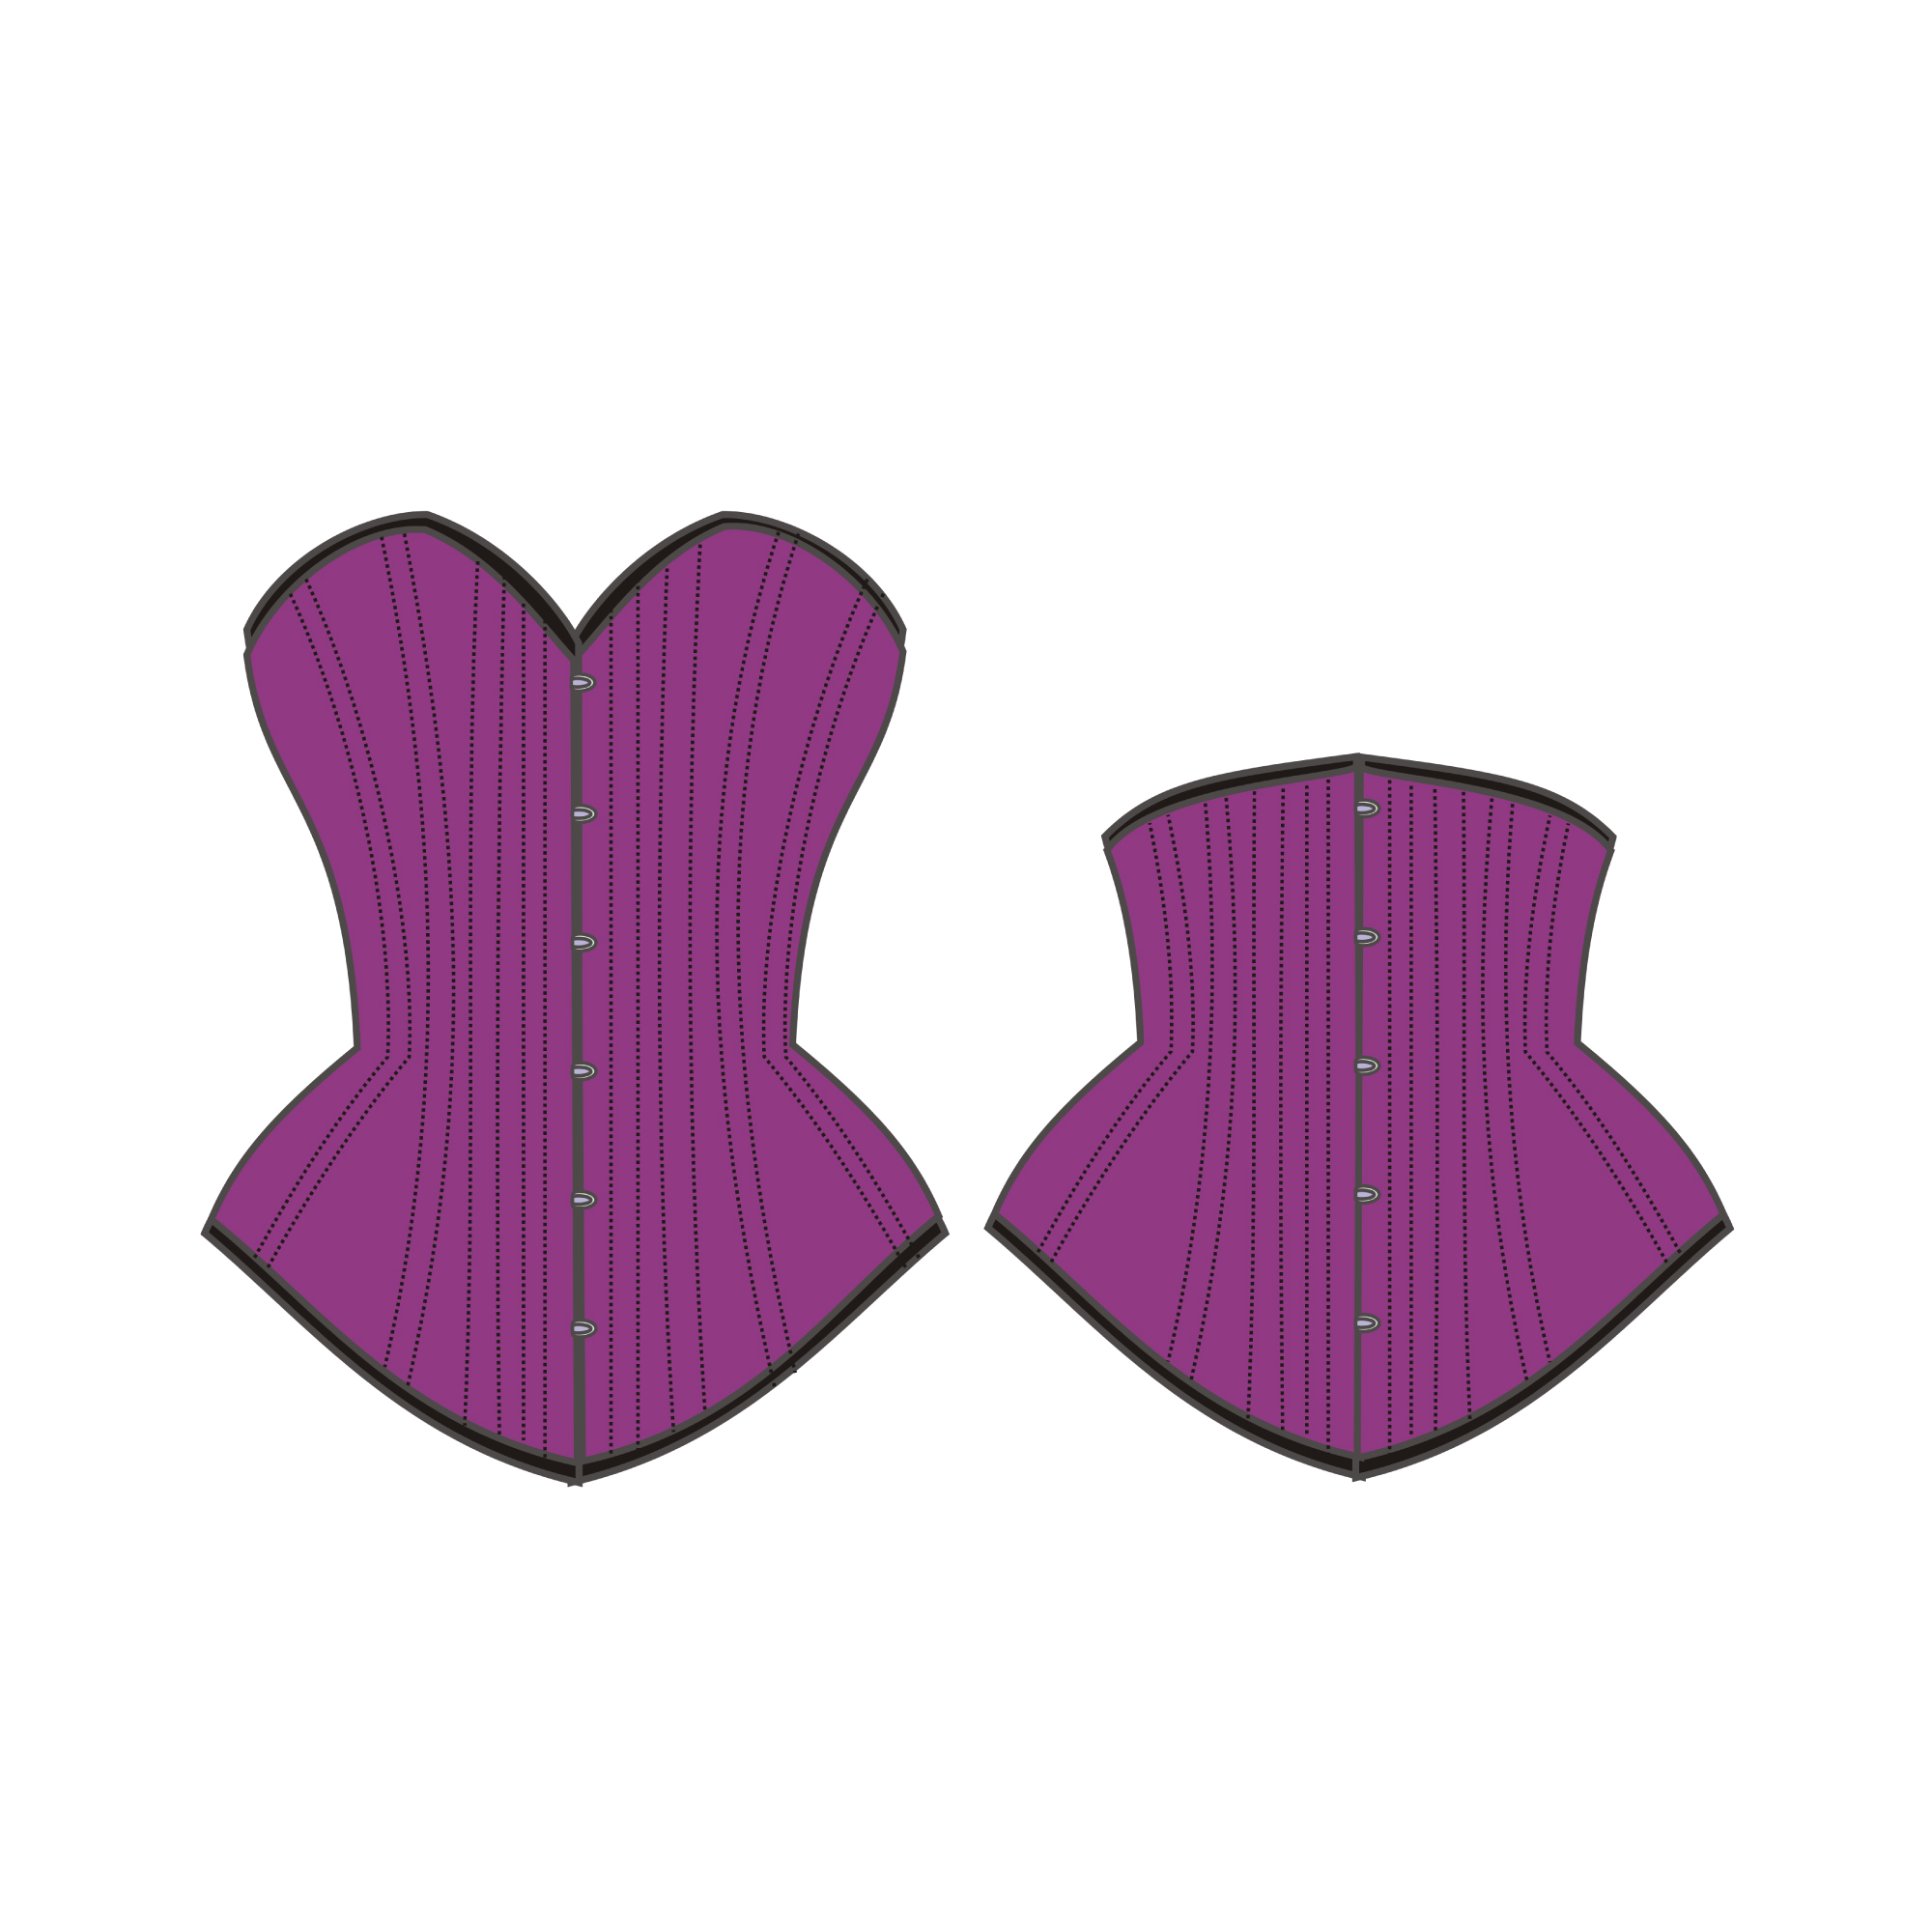 Corset and Body Shaper Patterns